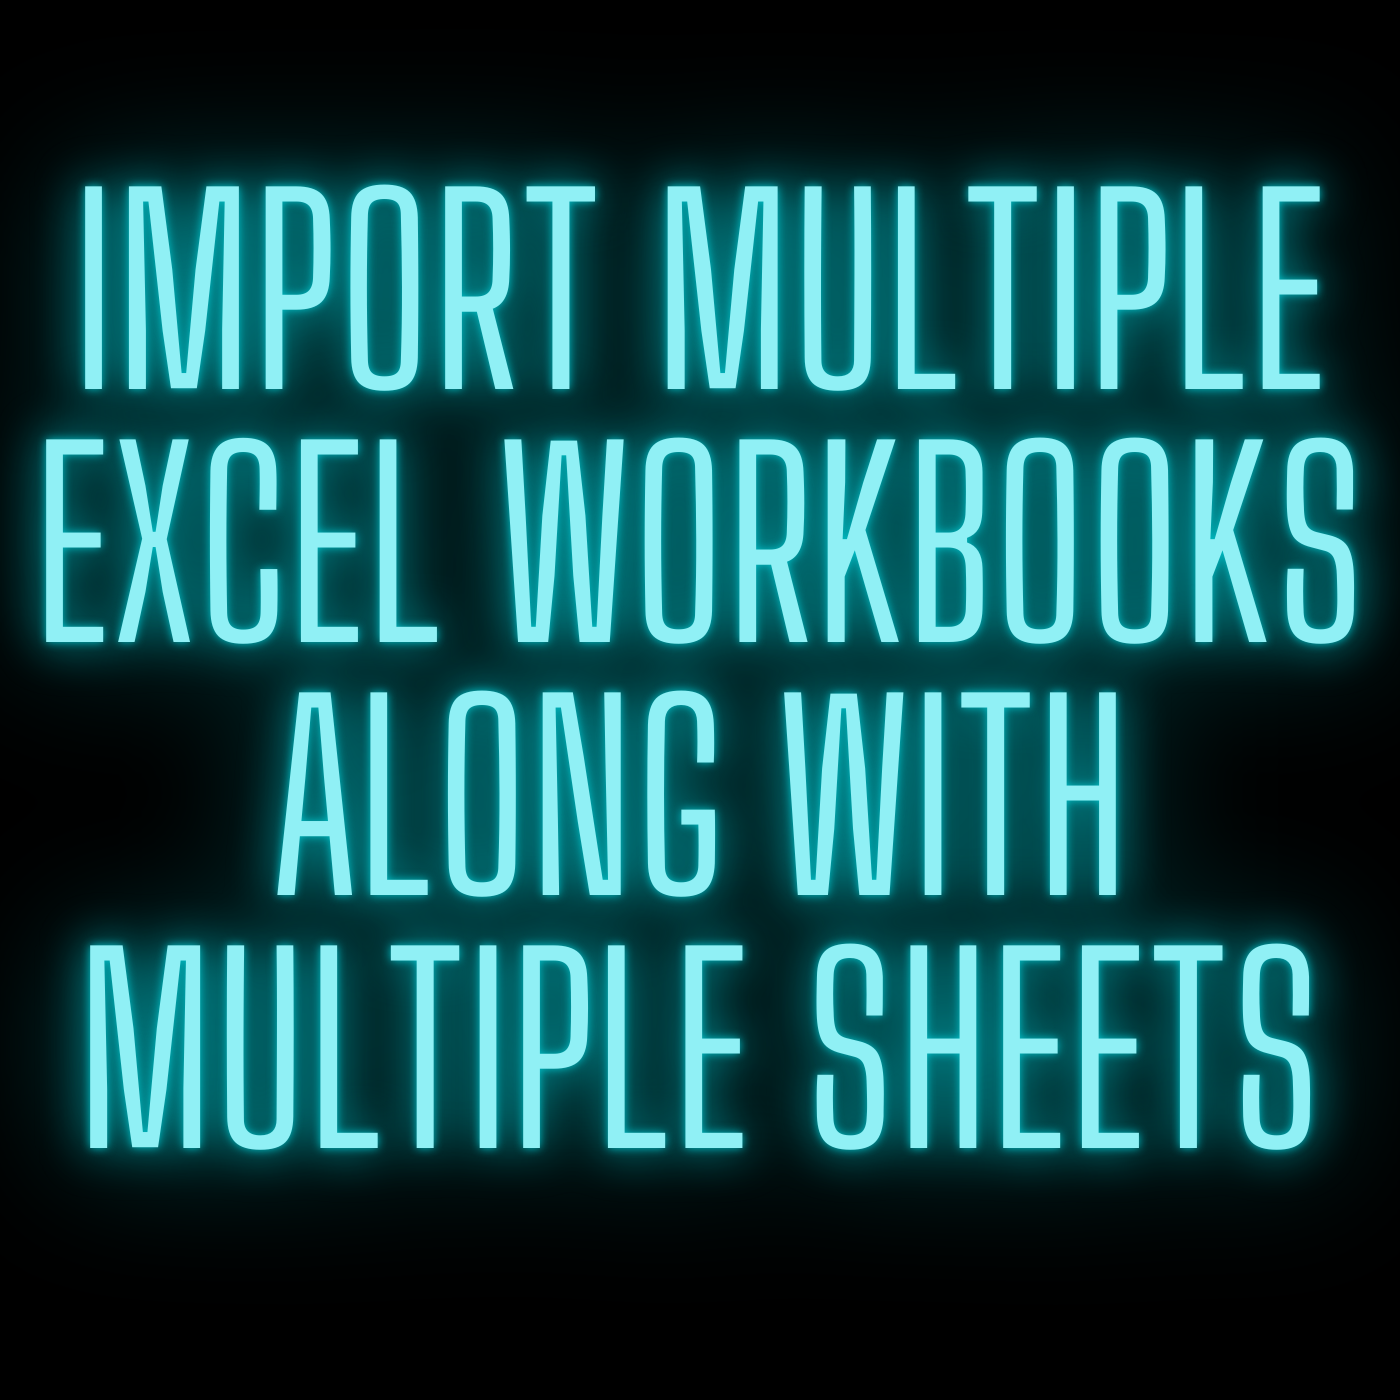 How To Import Multiple Sheets In Excel